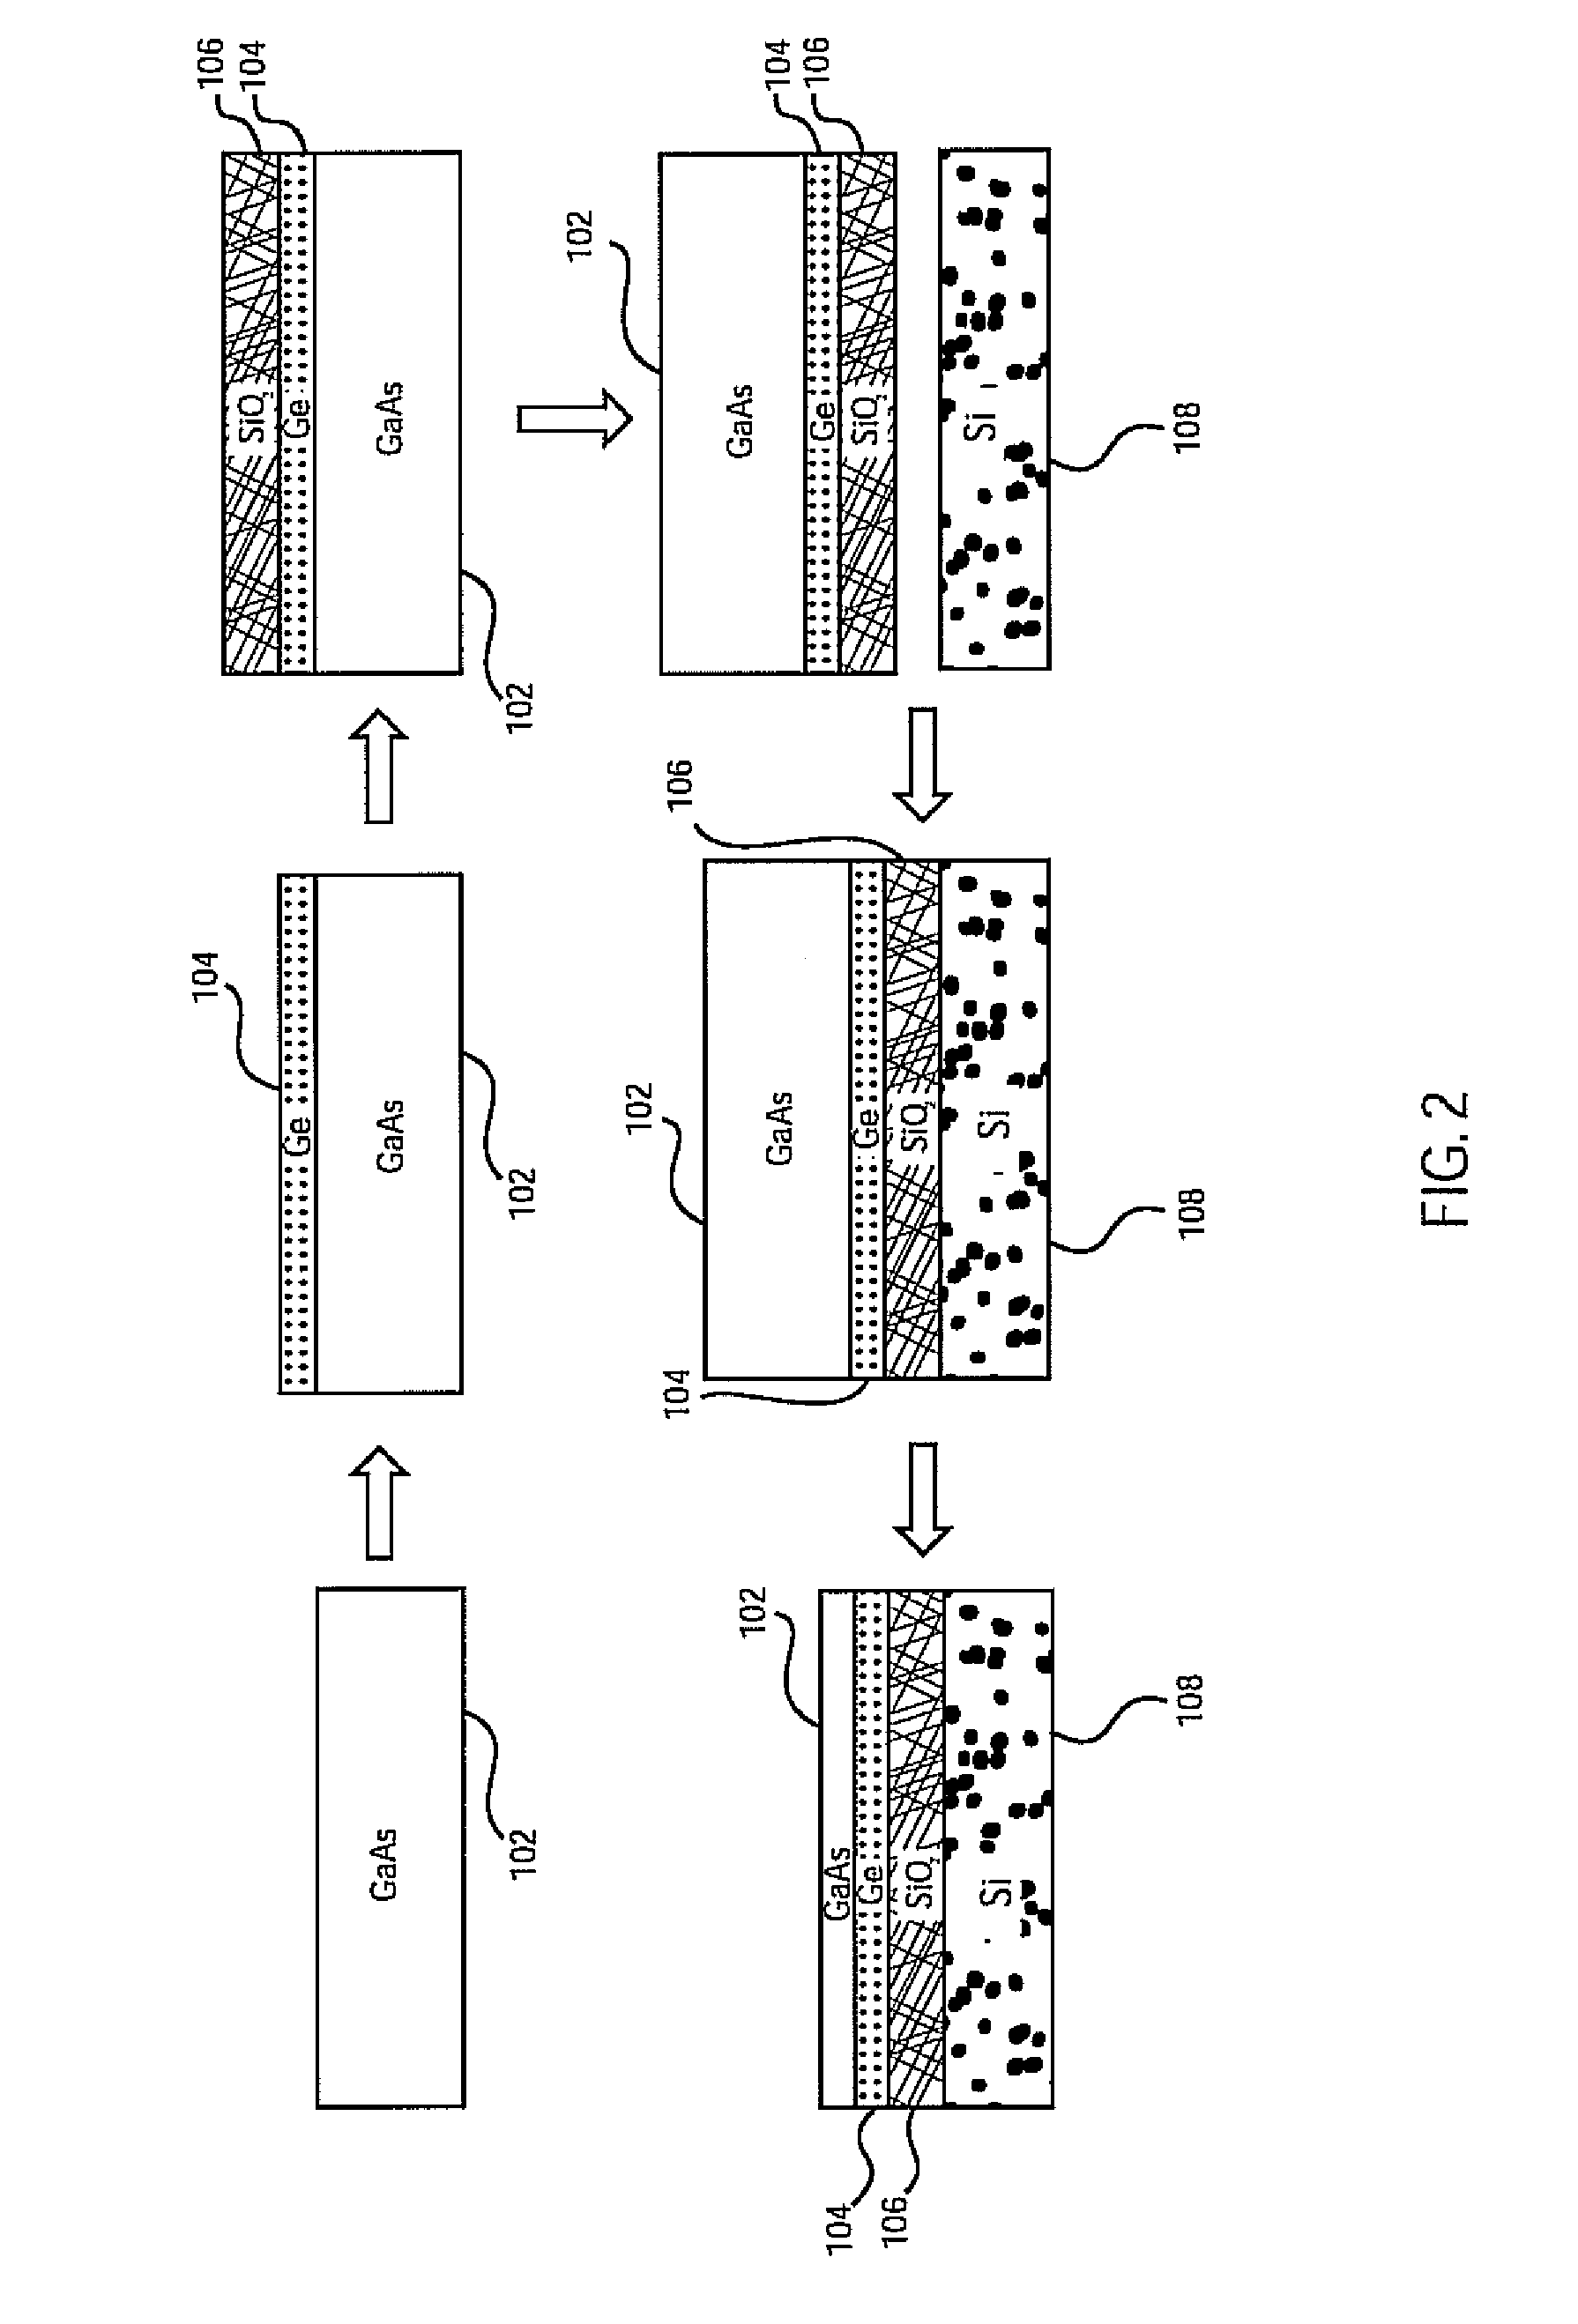 Structure and method of integrating compound and elemental semiconductors for high-performance CMOS